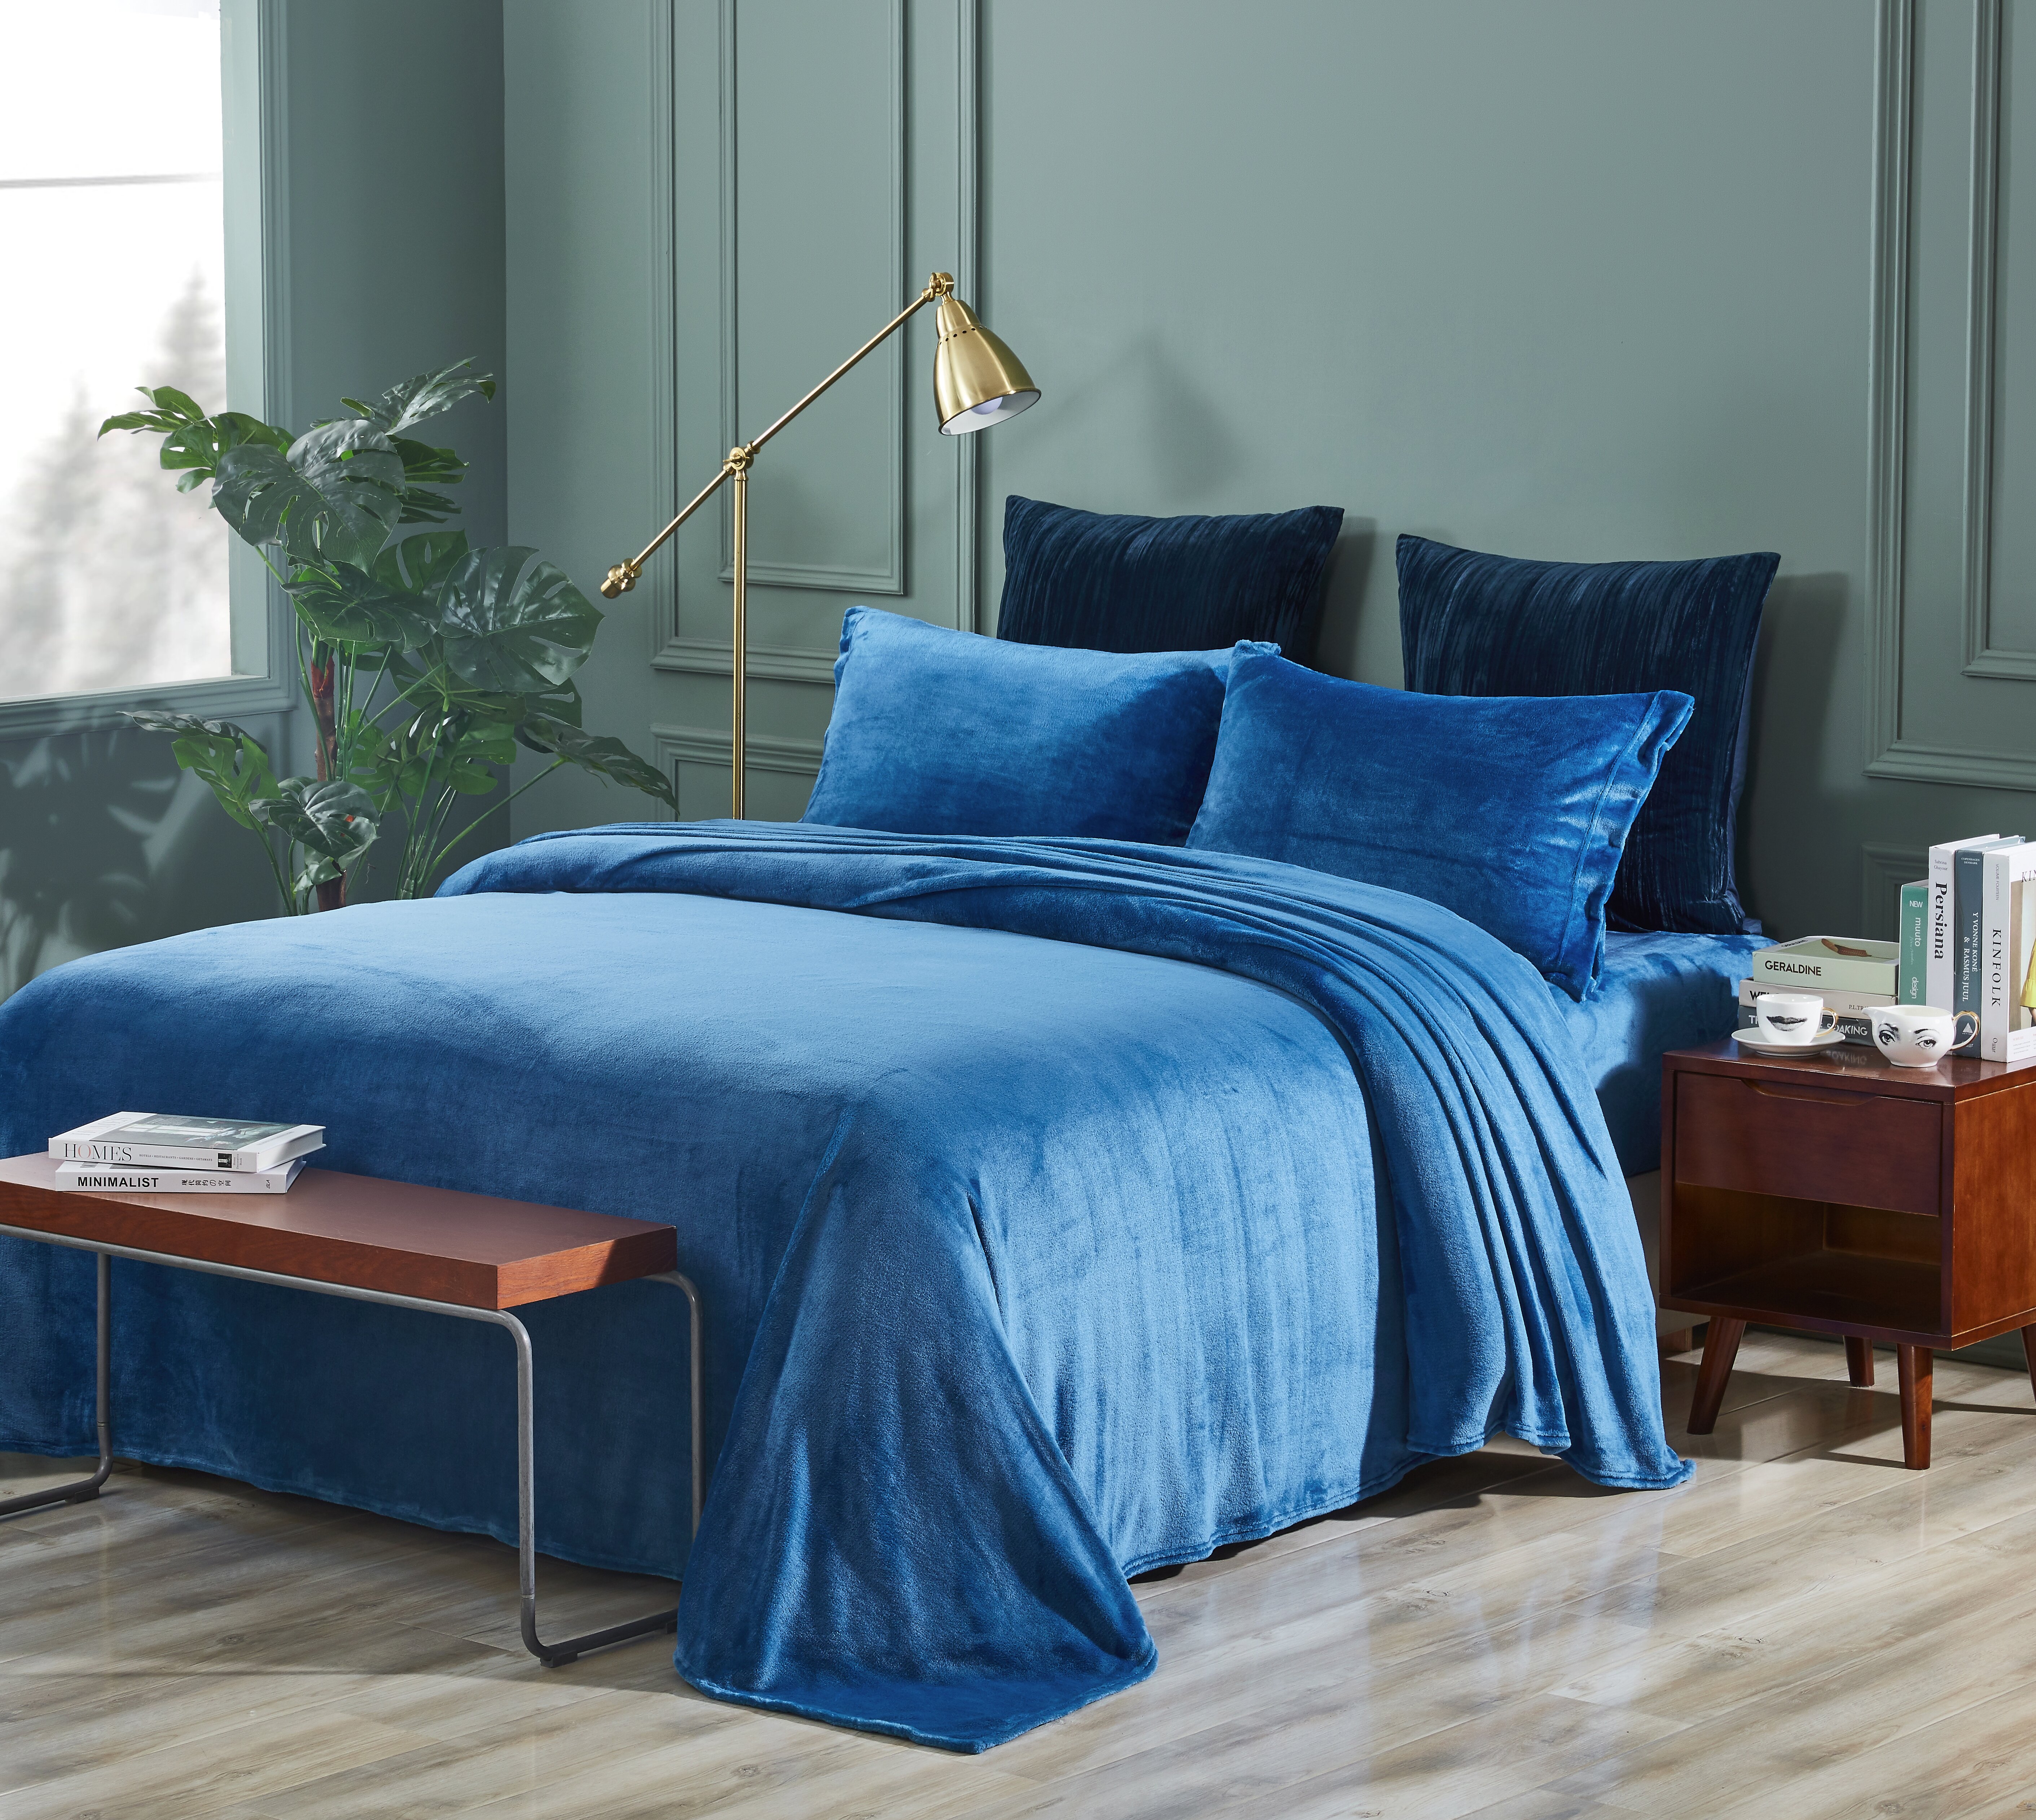 3in1 LV BLUE Fitted Bed Sheet - Canadian Fabric Bedsheet with 2 Pillowcase  (4 Corner Garterized Fitted Bedsheet)